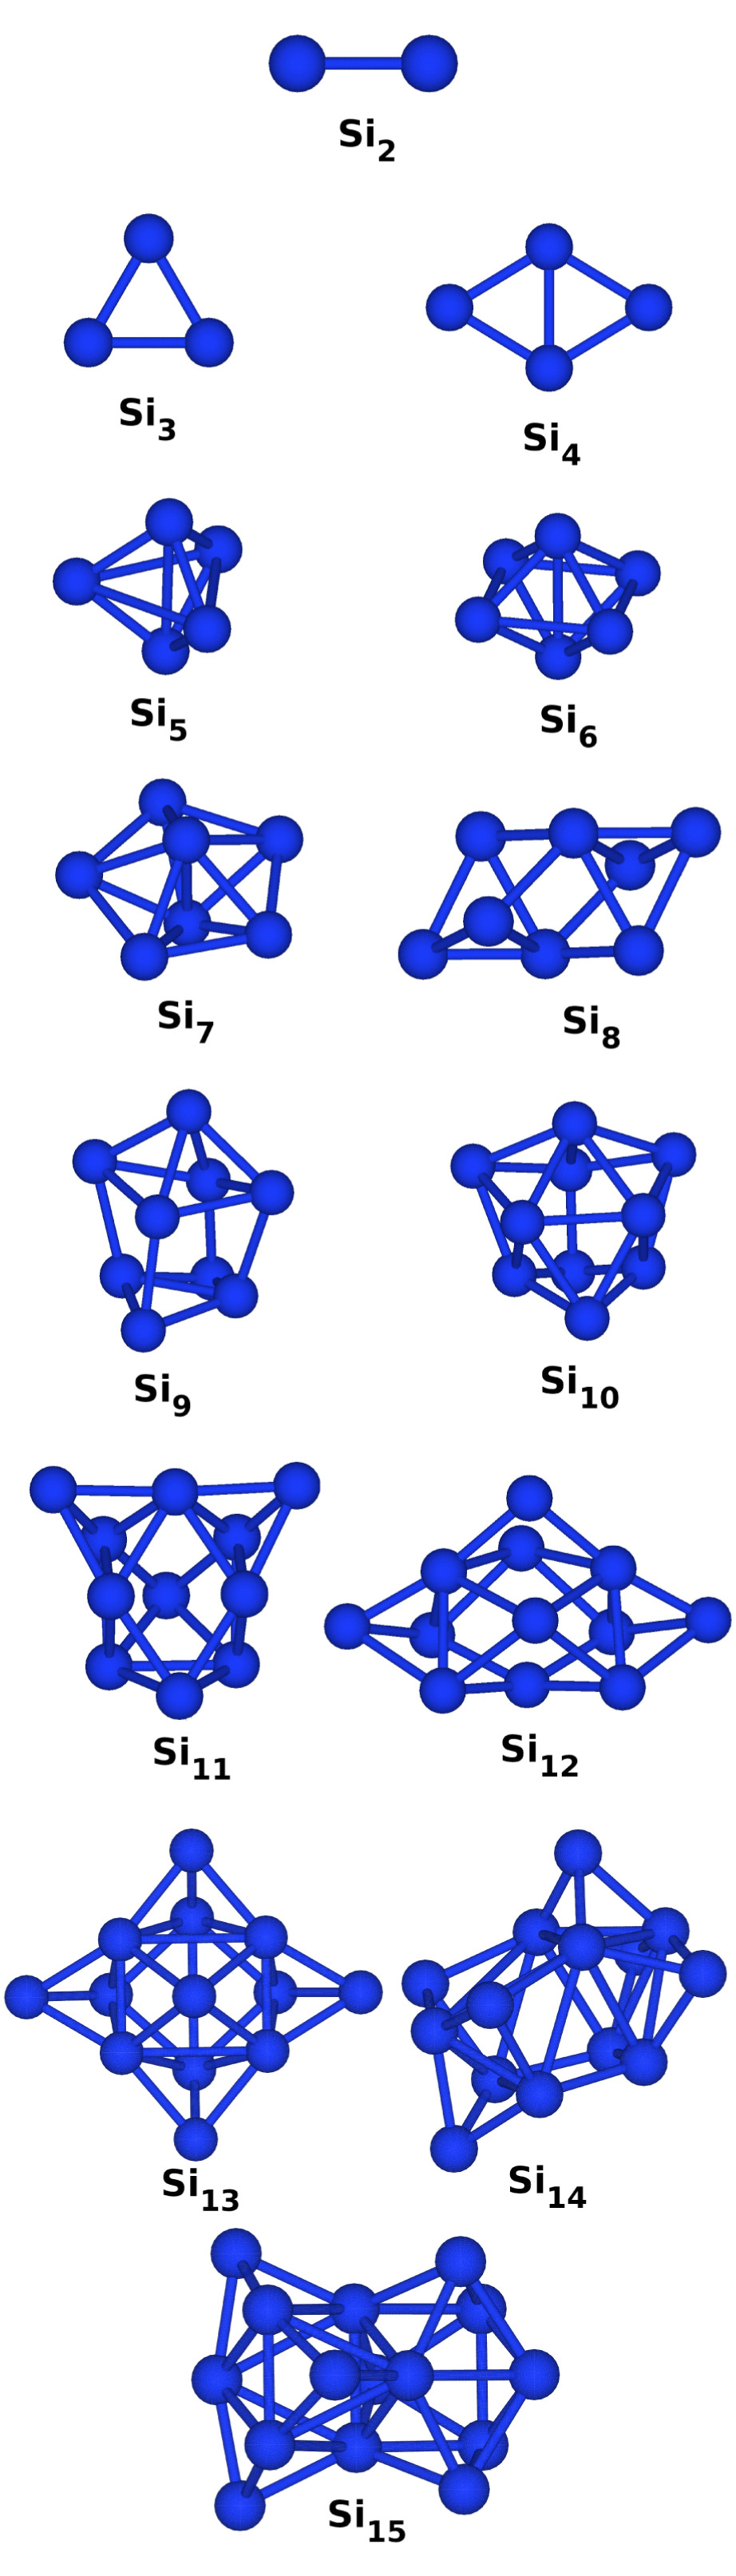 From structure to surface tension of small silicon clusters by quantum Monte Carlo simulations.